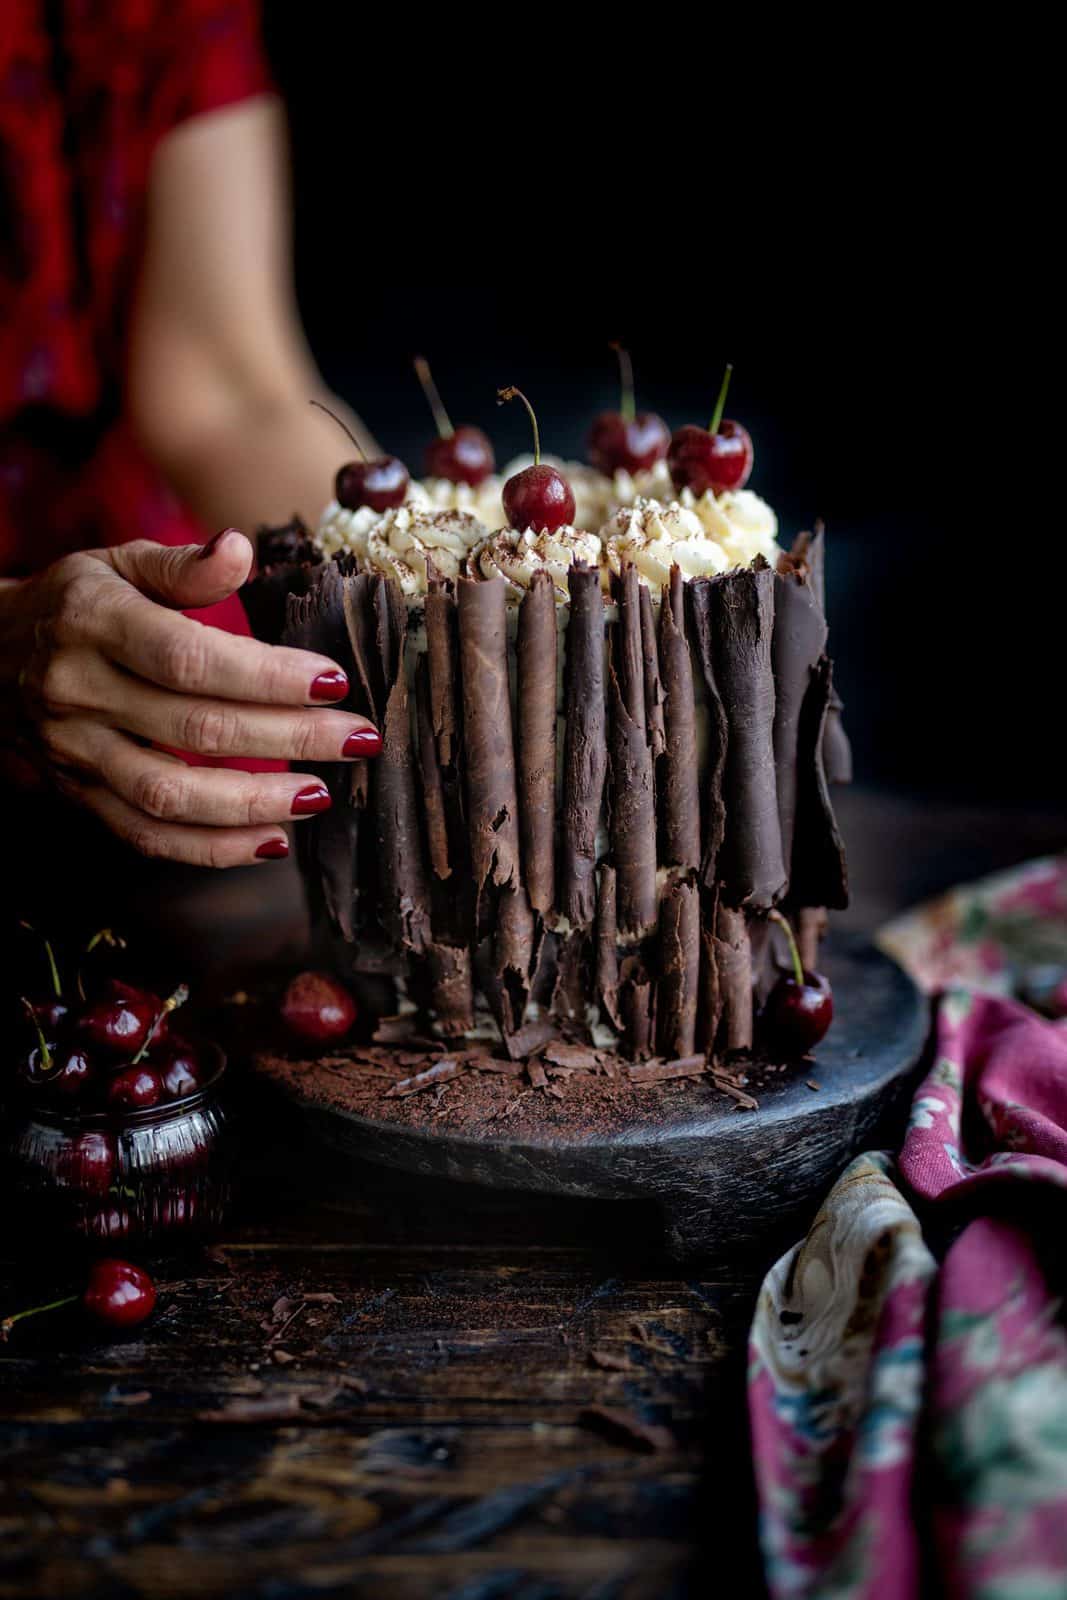 Black Forest Gâteau decorated with chocolate curls and fresh cherries